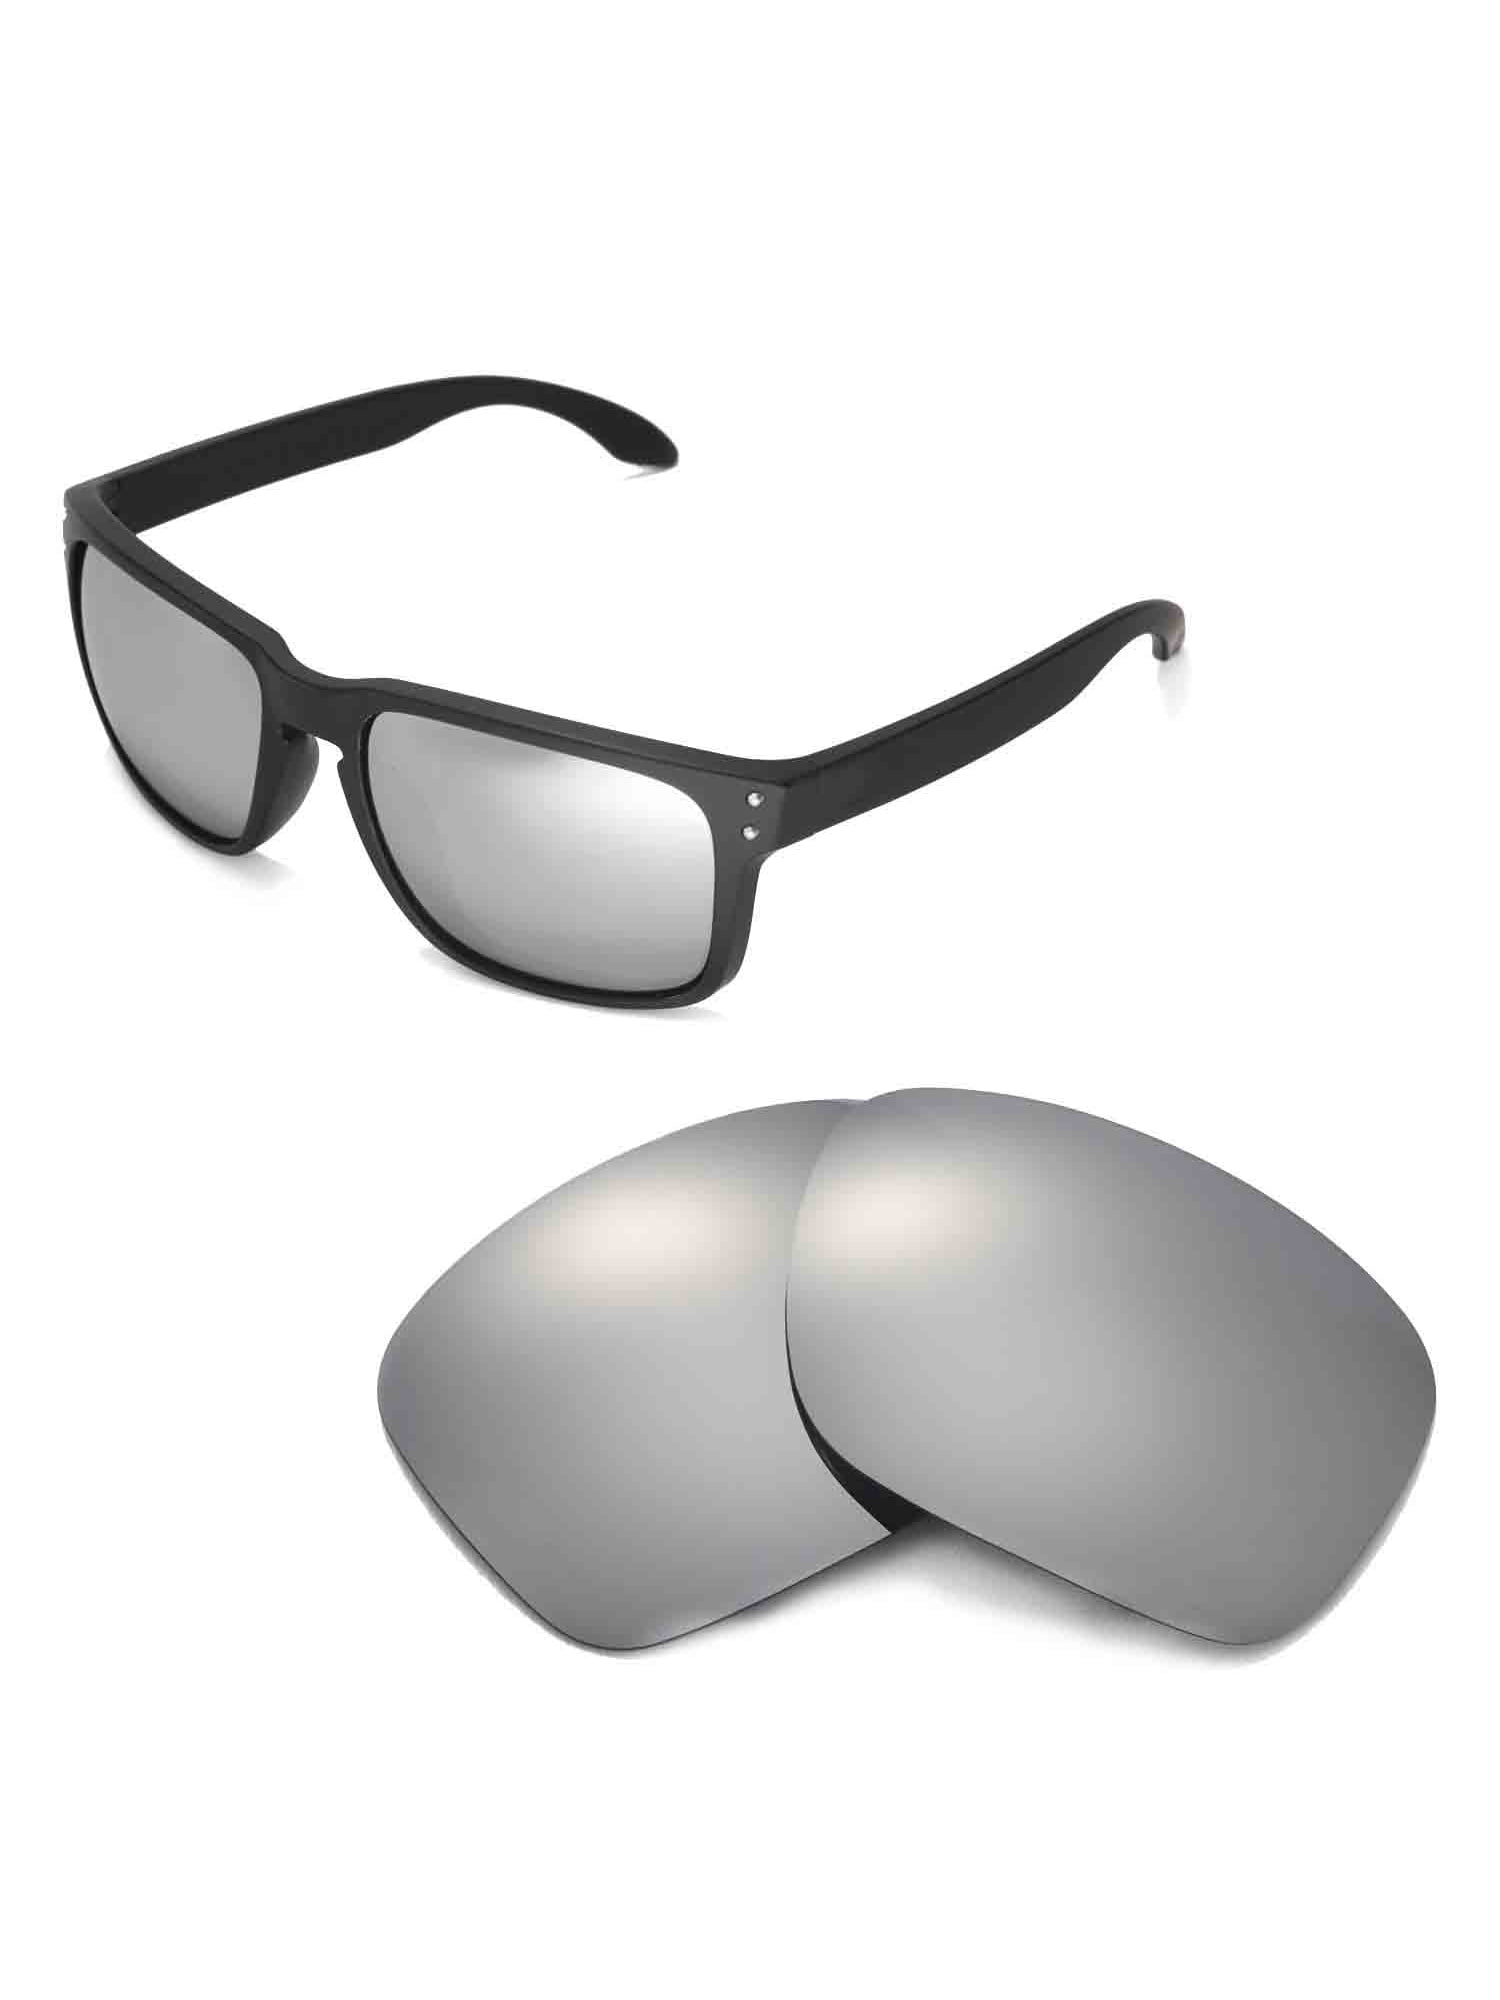 replacement lenses for oakley holbrook sunglasses